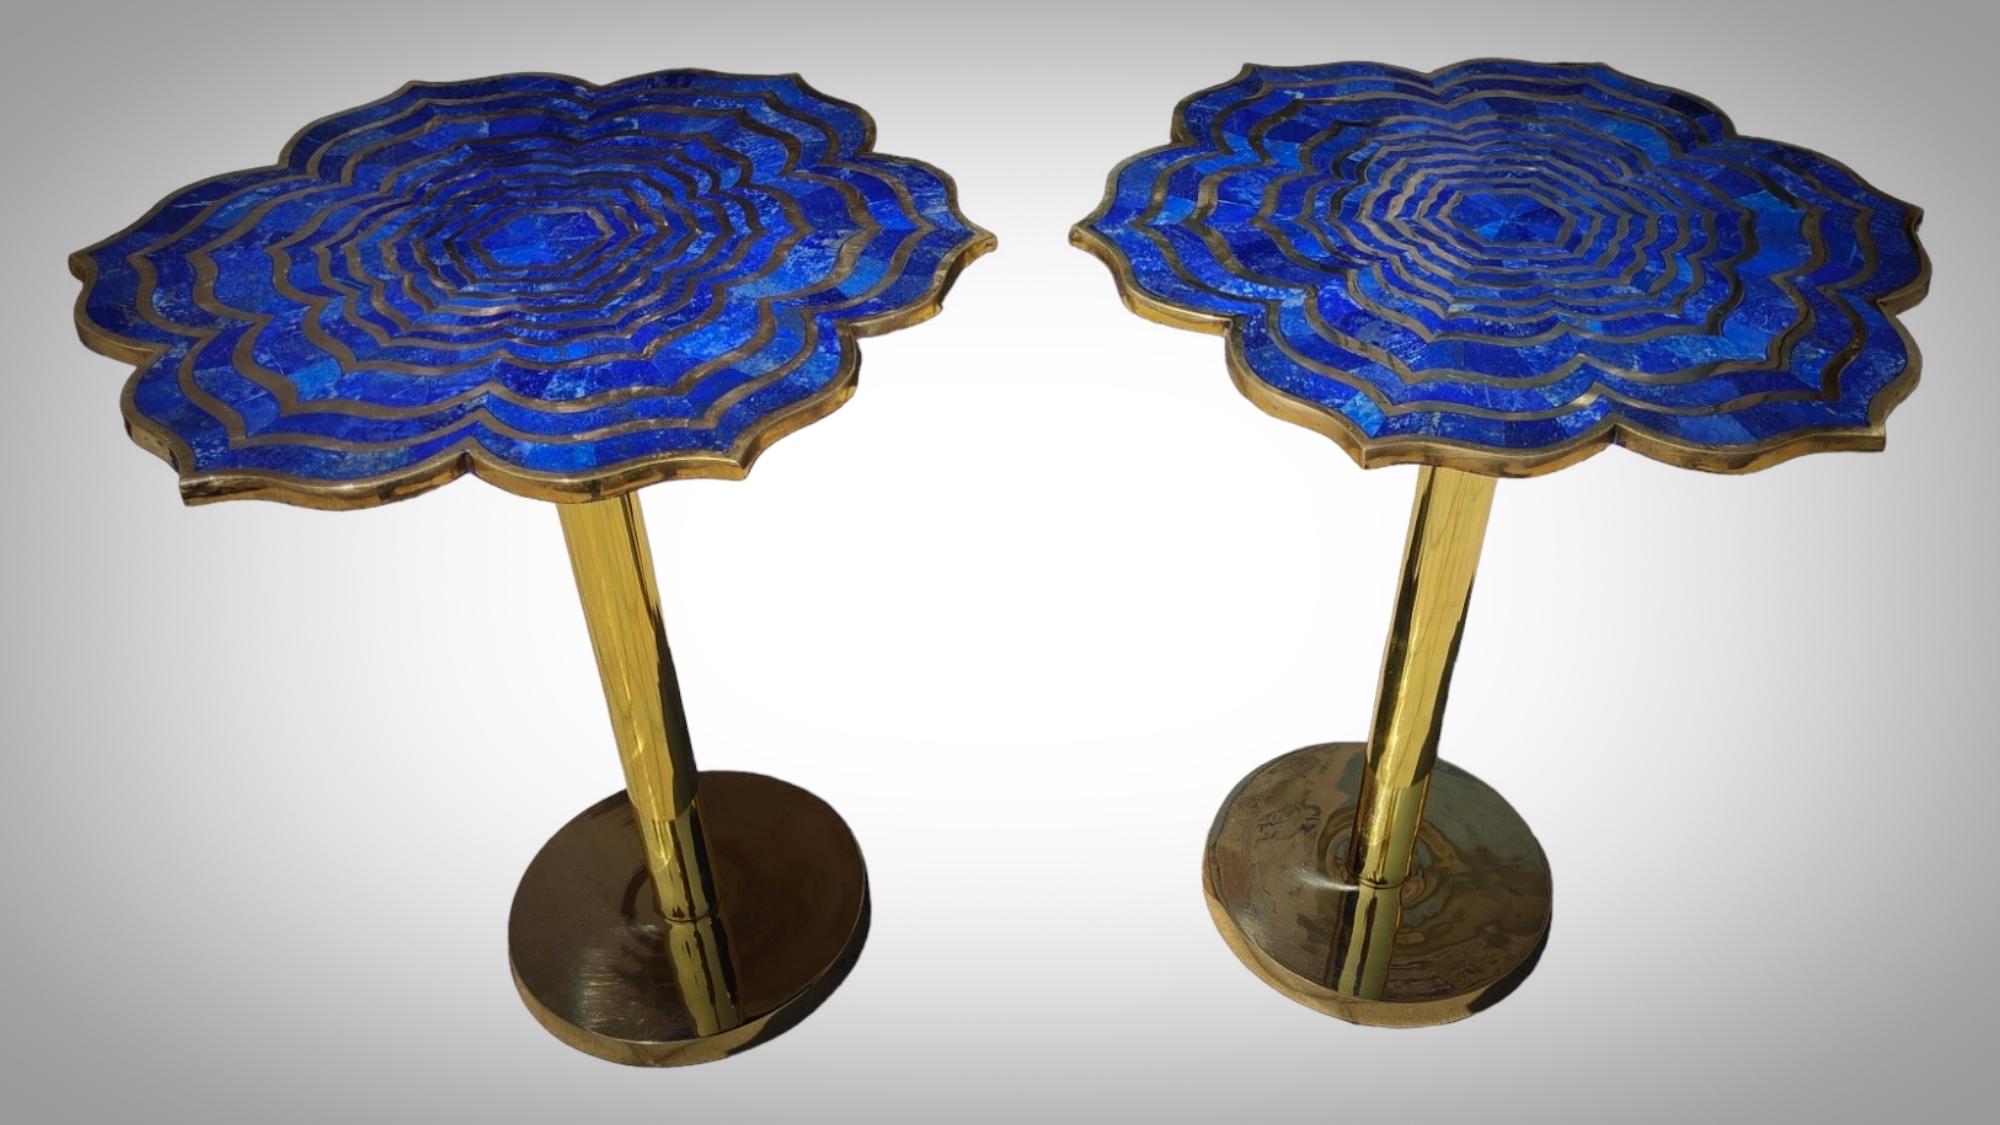 Pair Of Lapis lazuli  And Bronze Tables
DECORATIVE TABLES, MADE WITH SEMI-PRECIOUS LAPIS LAZULI  STONES USED BY JEWELERS- AND QUALITY BRONZE. FROM THE 70S. THEY ARE IN EXCELLENT CONDITION. MEASUREMENTS: 52 CM HIGH AND 45 CM IN DIAMETER